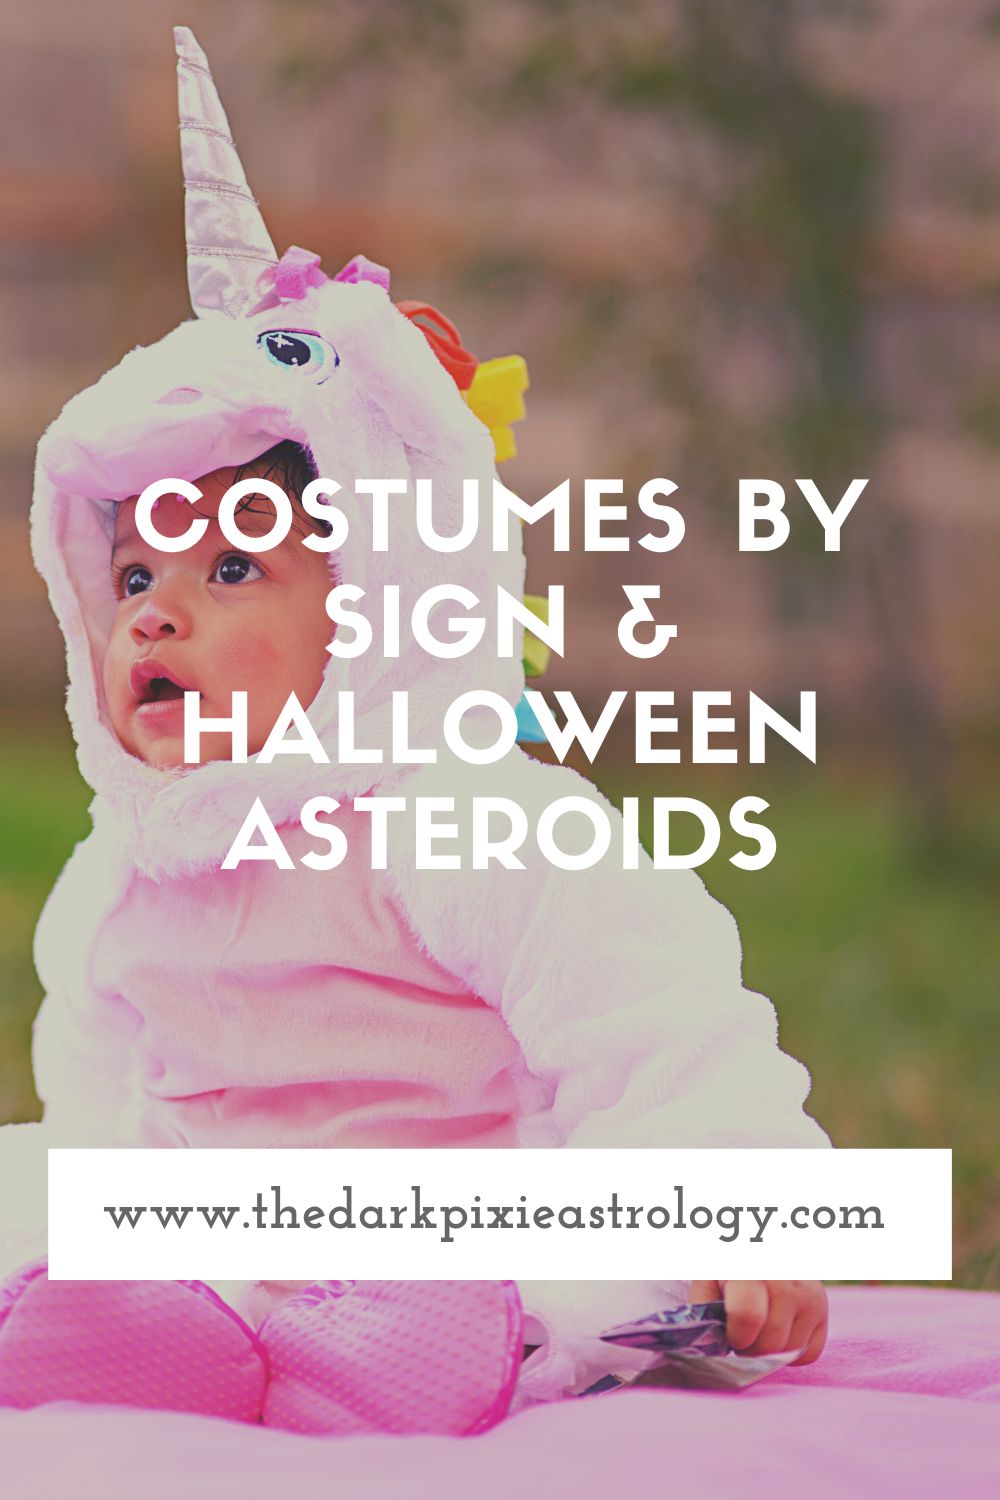 Costumes by Sign & Halloween Asteroids - The Dark Pixie Astrology